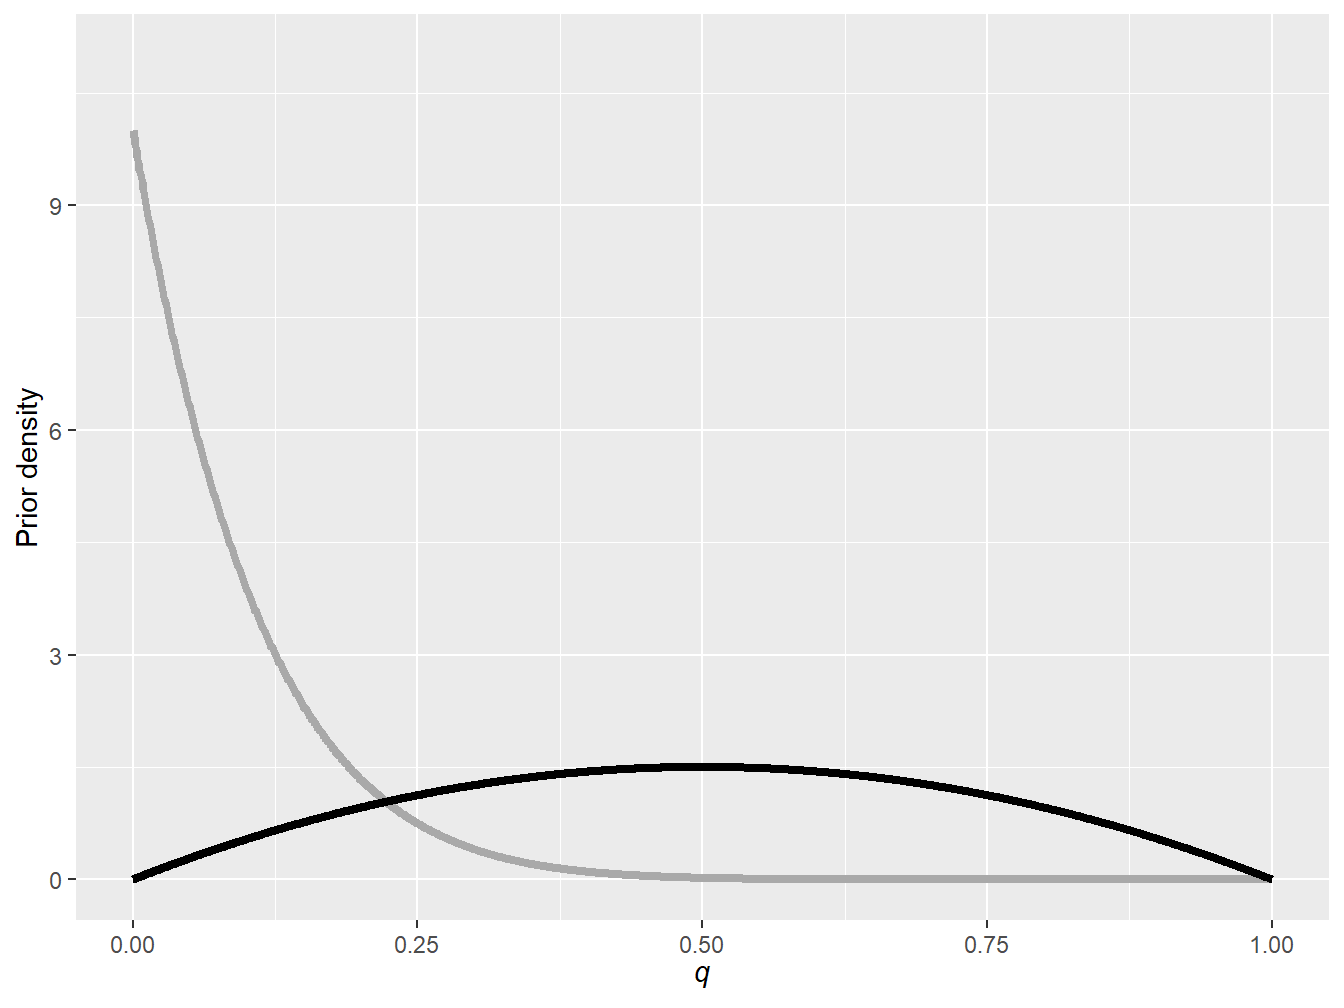 Beta prior densities: \(a=1\) and \(b=10\) (gray), and \(a=2\) and \(b=2\) (black)